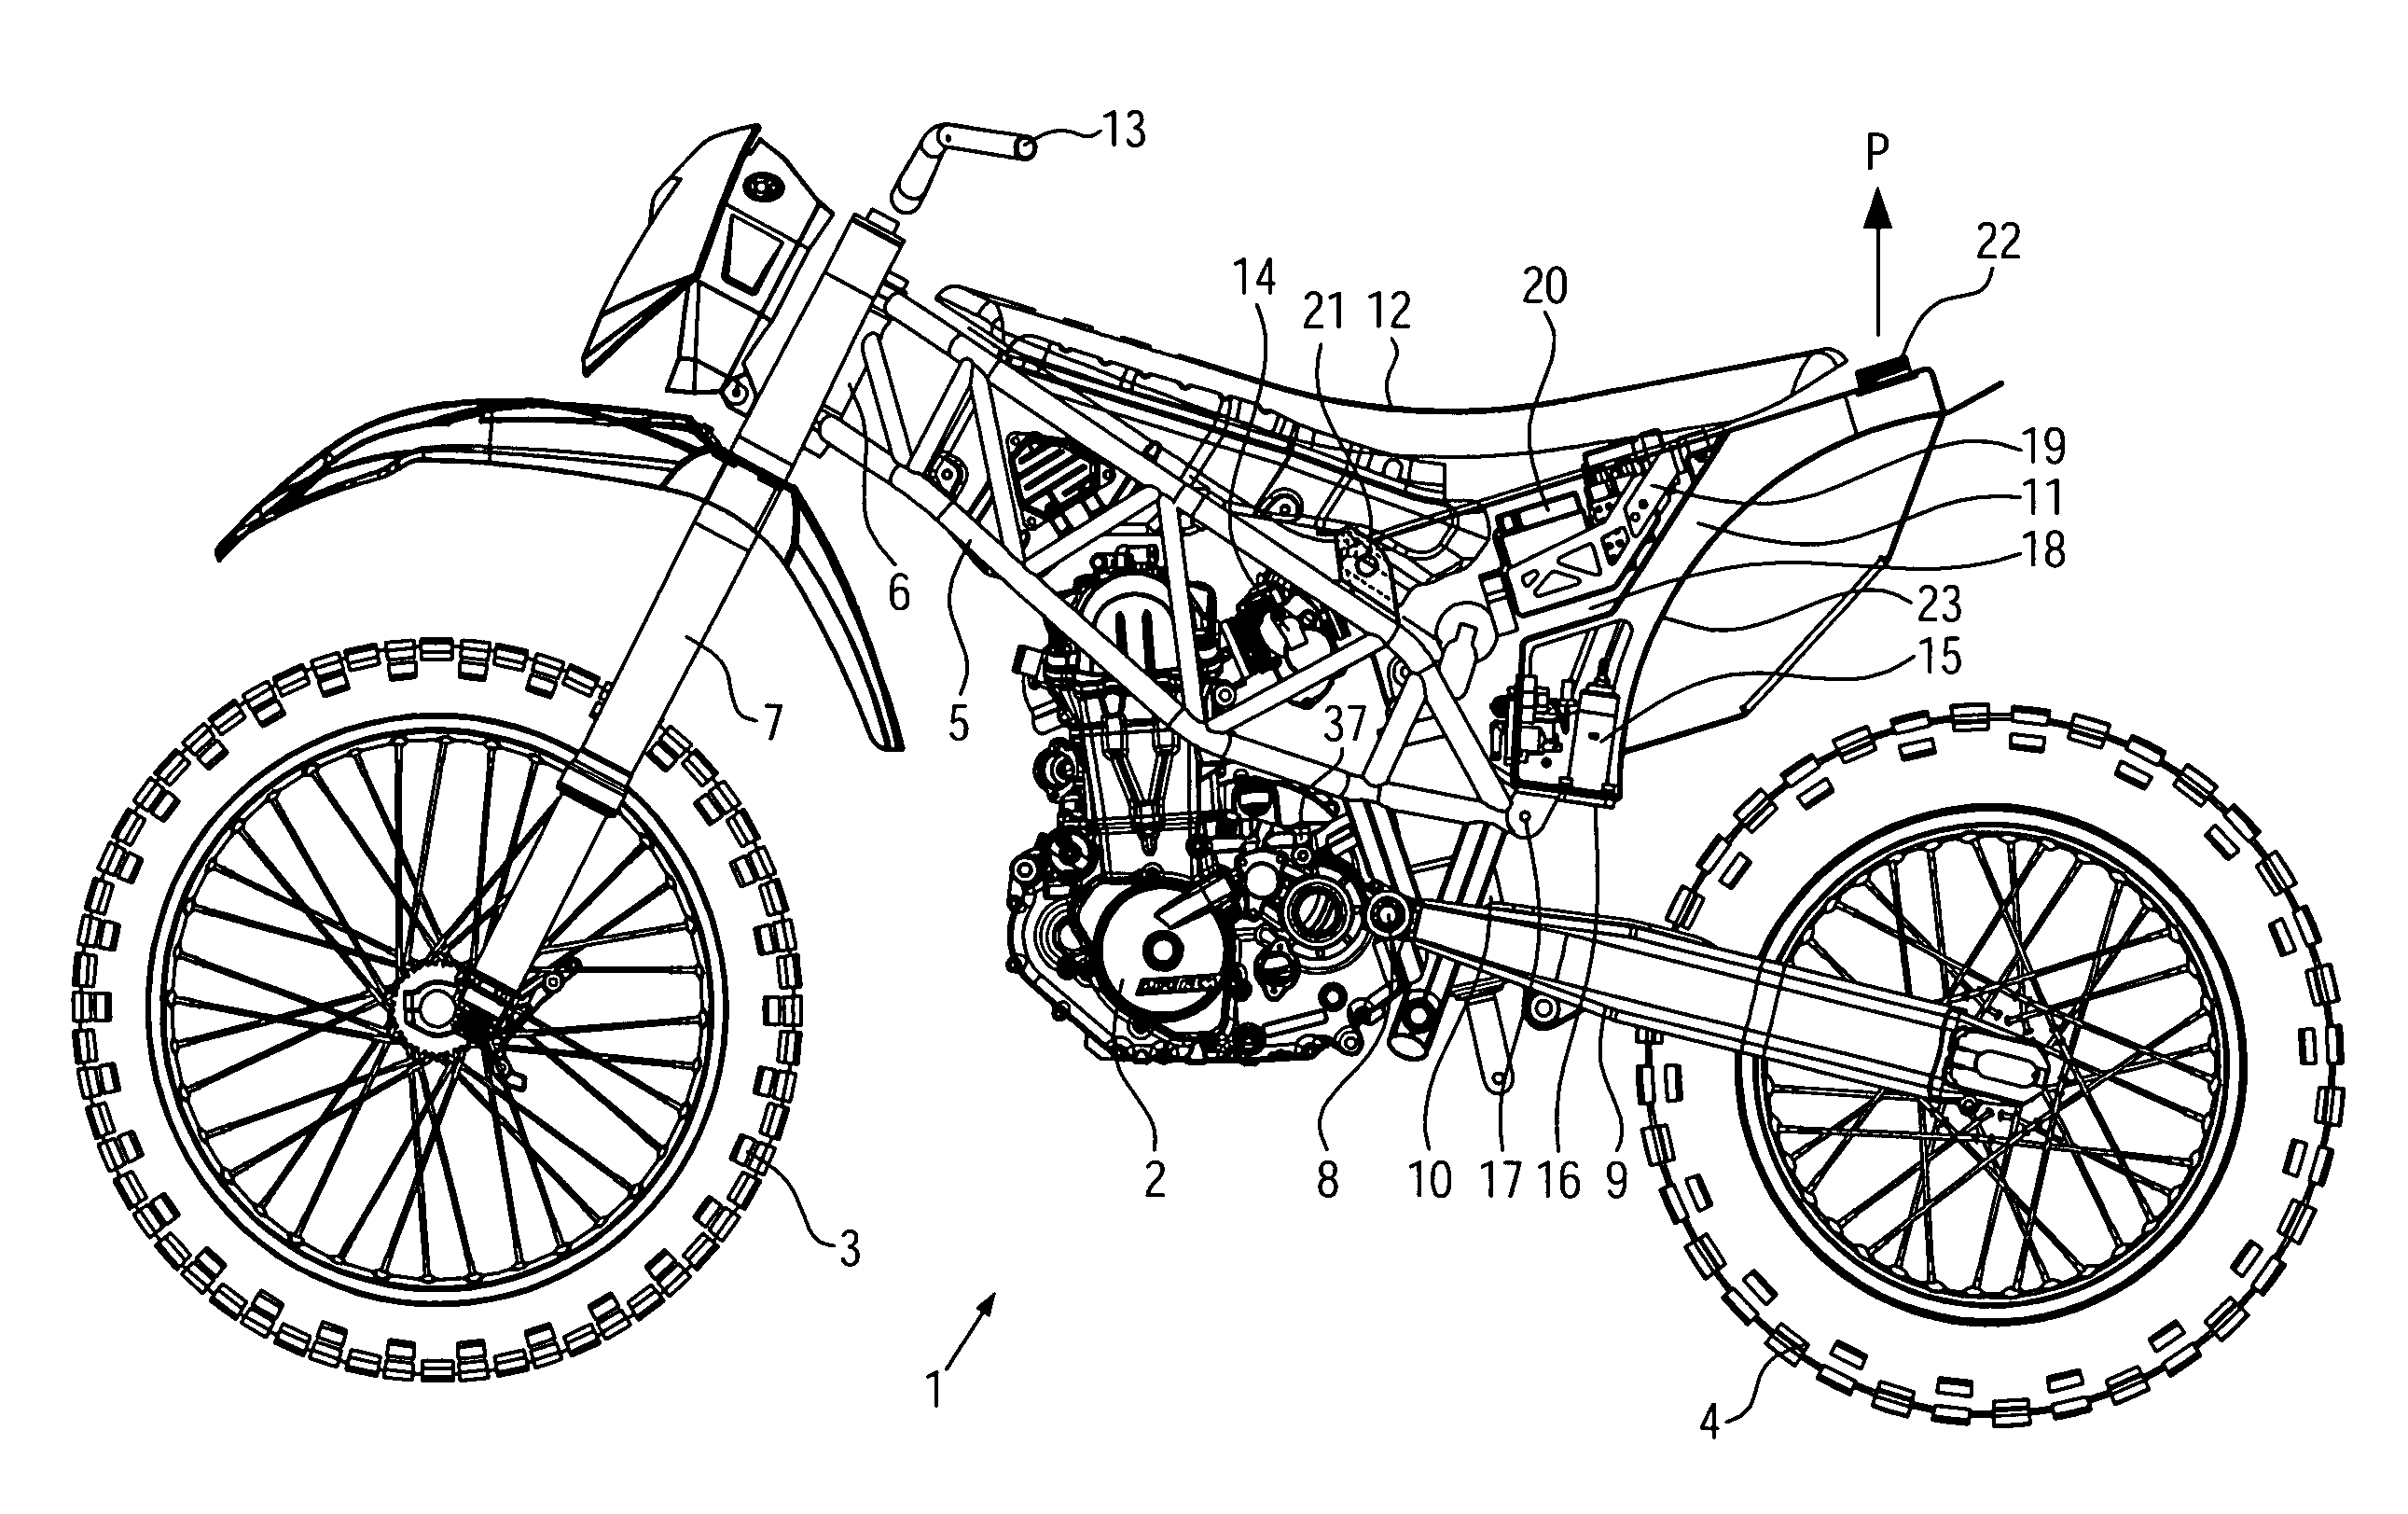 Off-road competition motorcycle